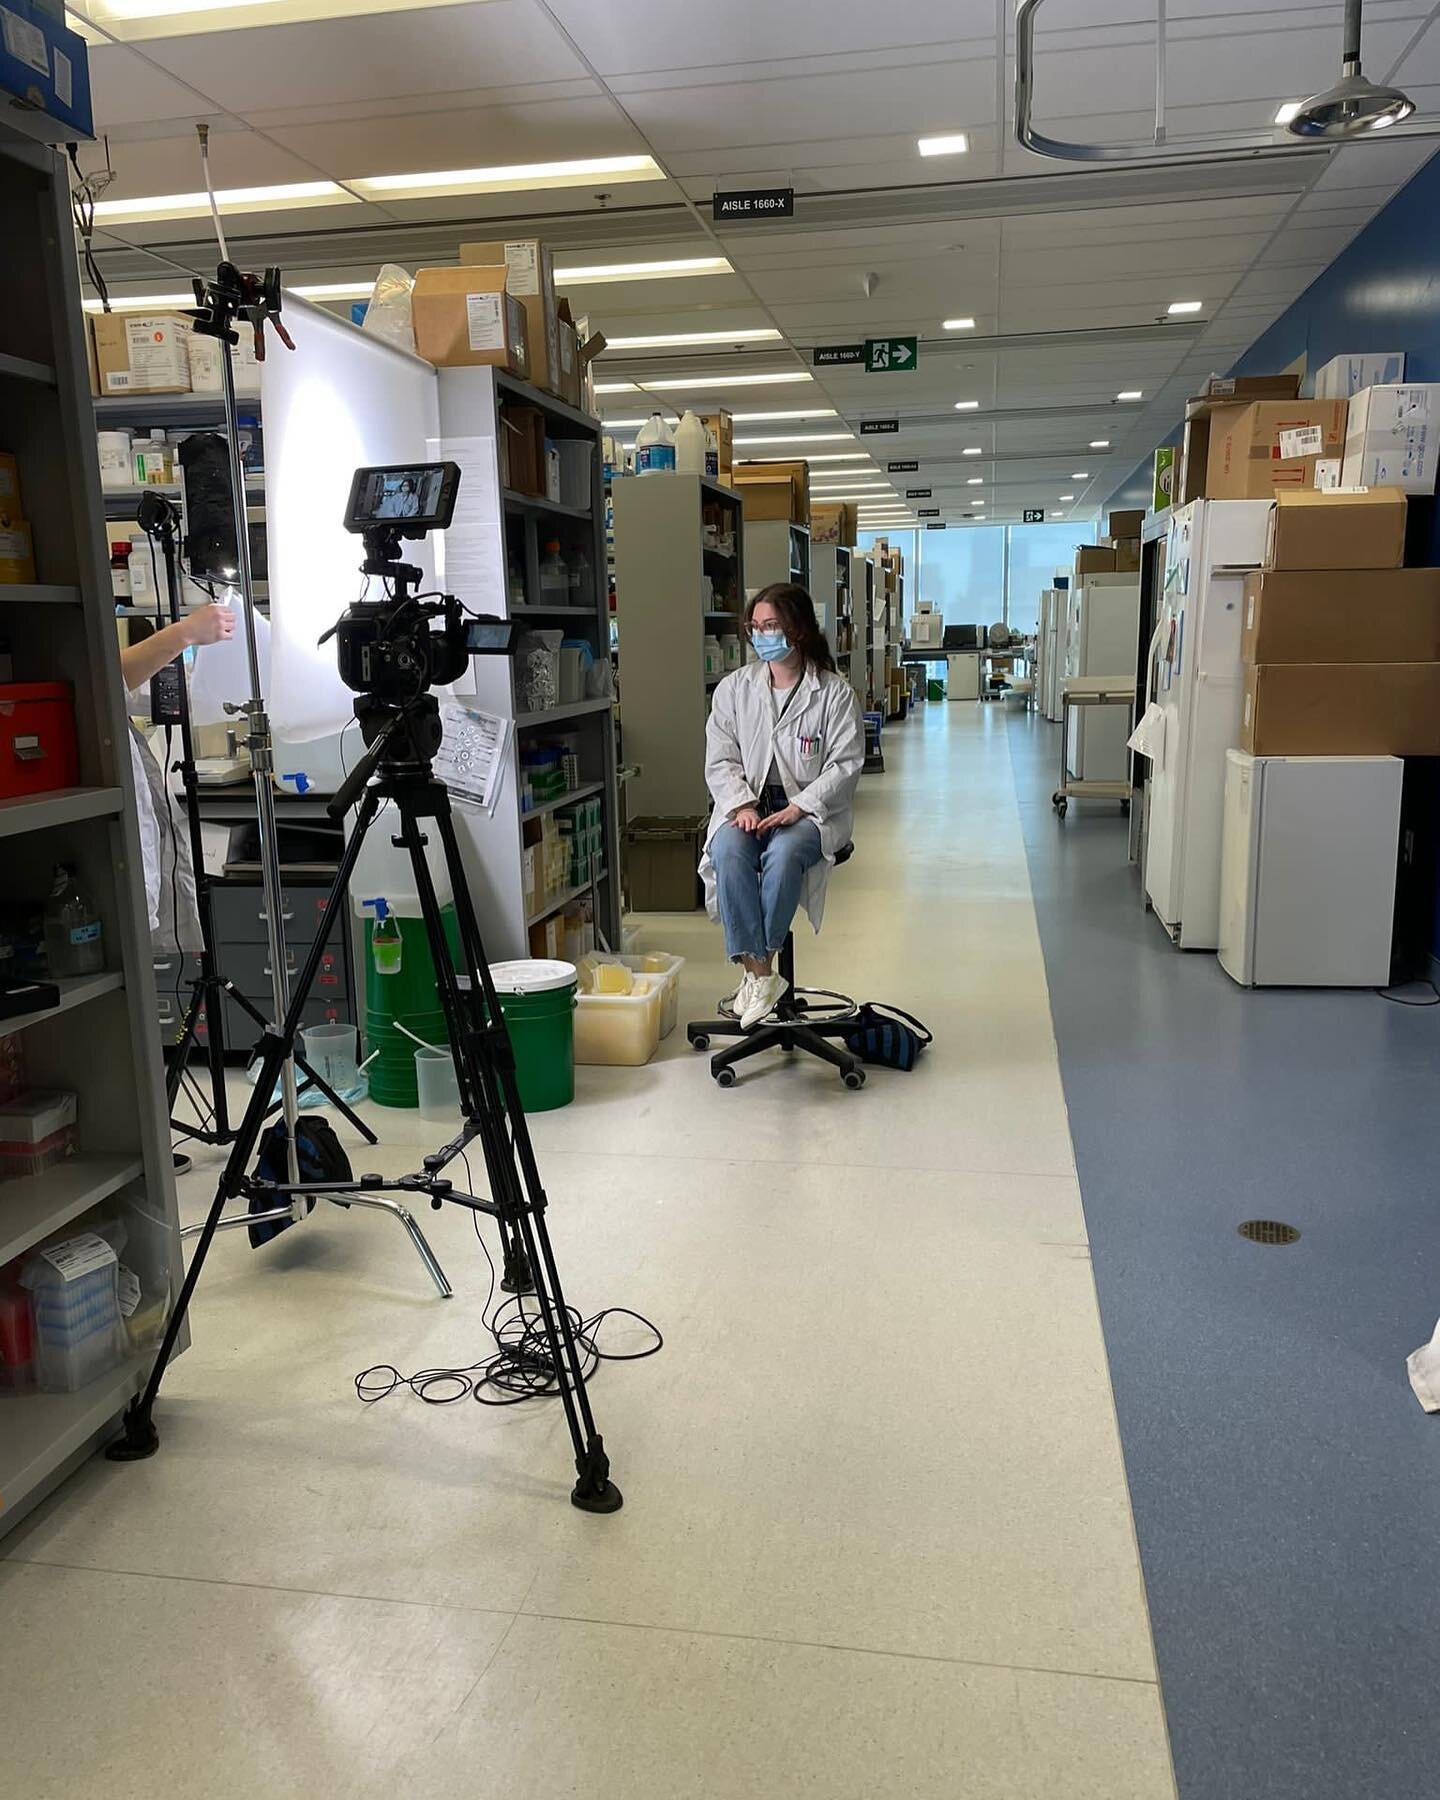 🎥 🎬 🔬 🪱 Exciting behind the scenes in lab today!